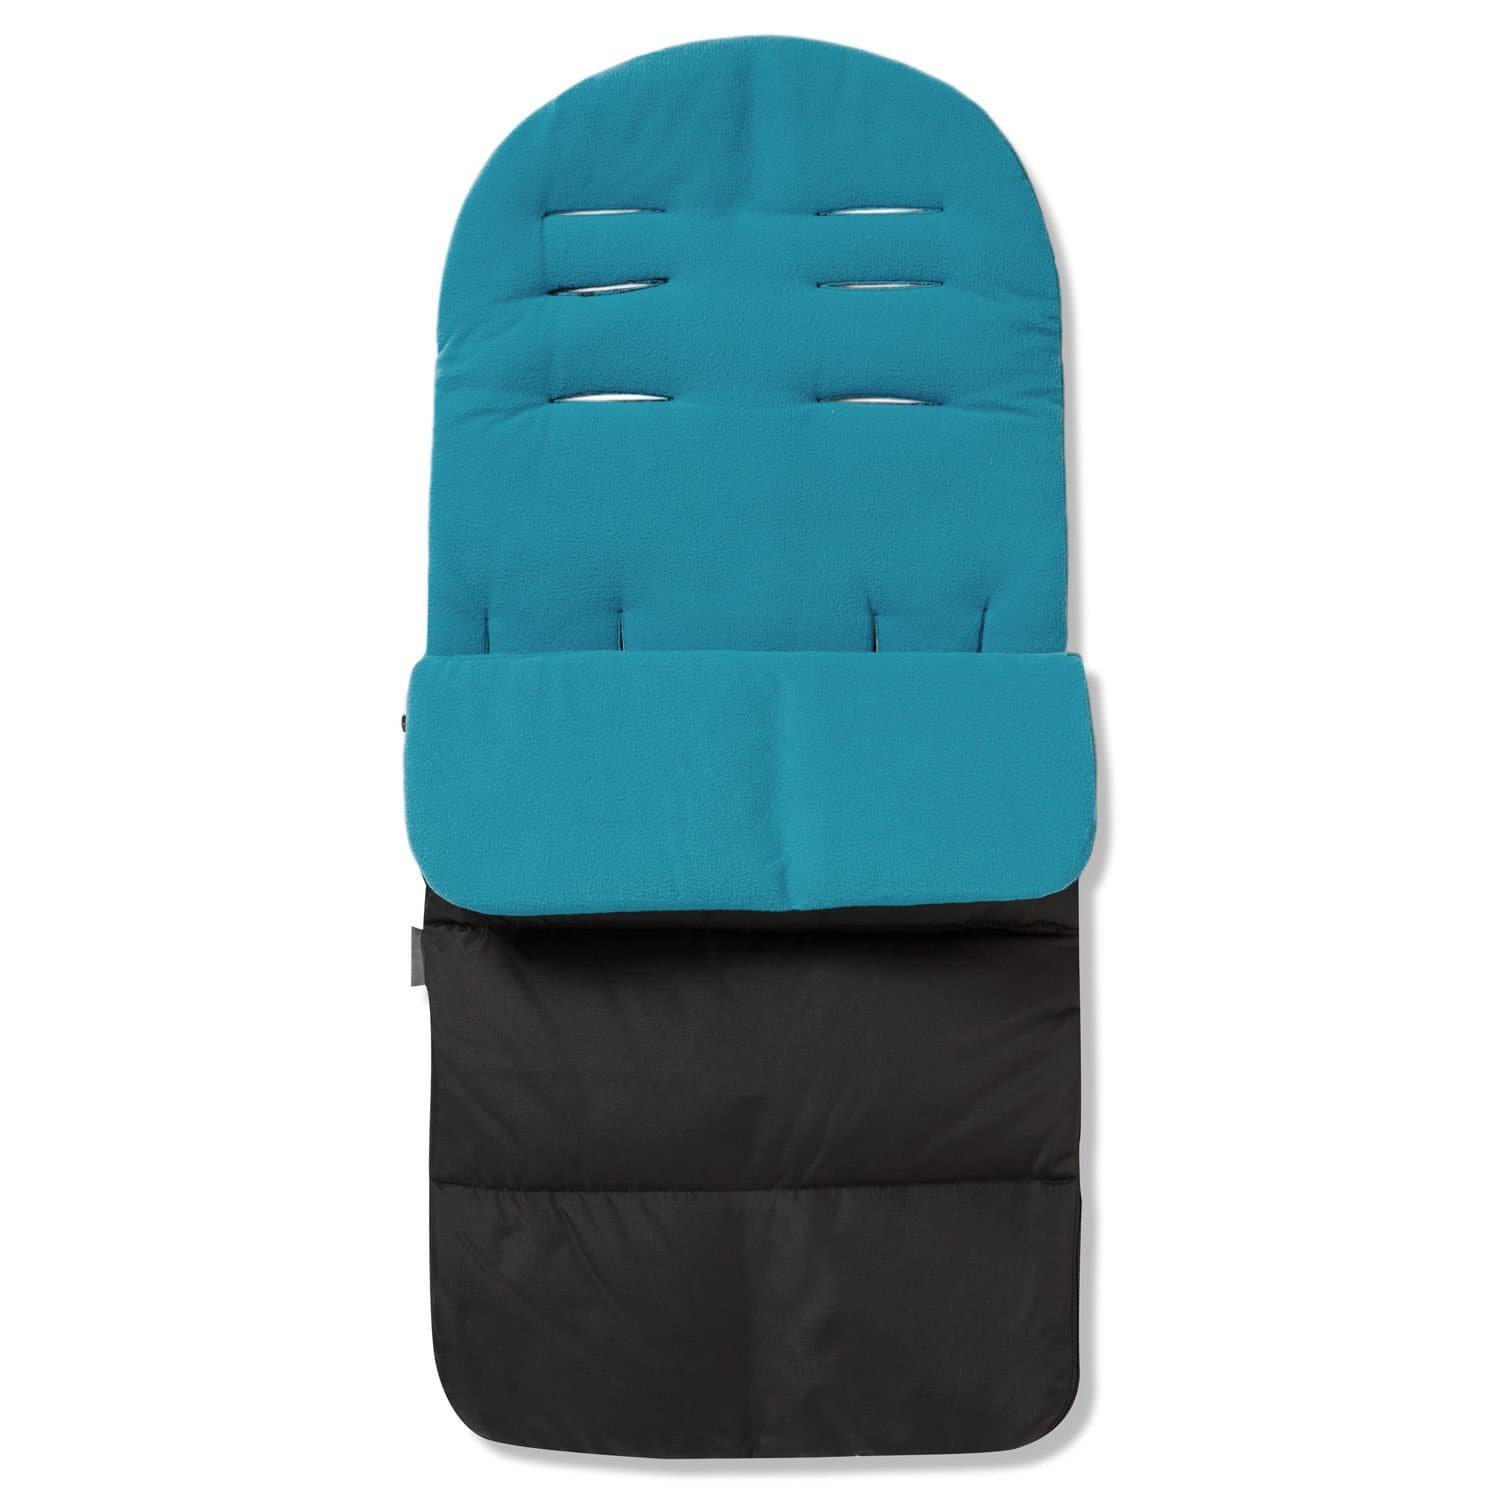 Premium Footmuff / Cosy Toes Compatible with Kiddicare - Ocean Blue / Fits All Models | For Your Little One